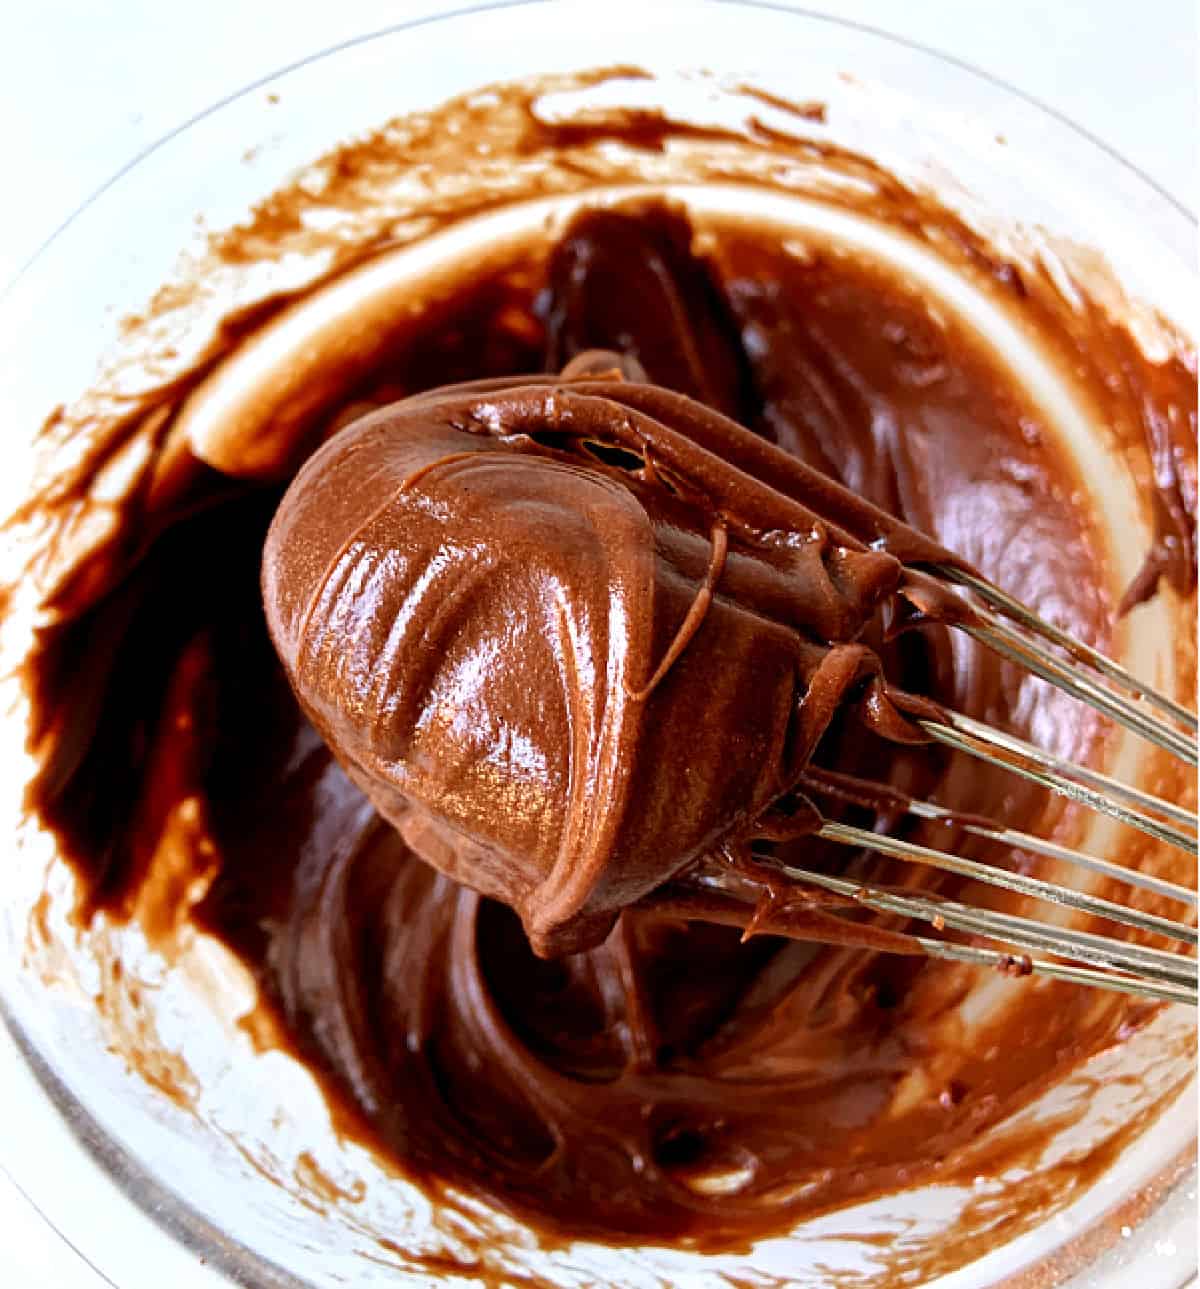 Close up of smooth shiny chocolate frosting on a wire whisk, rest of frosting in glass bowl below